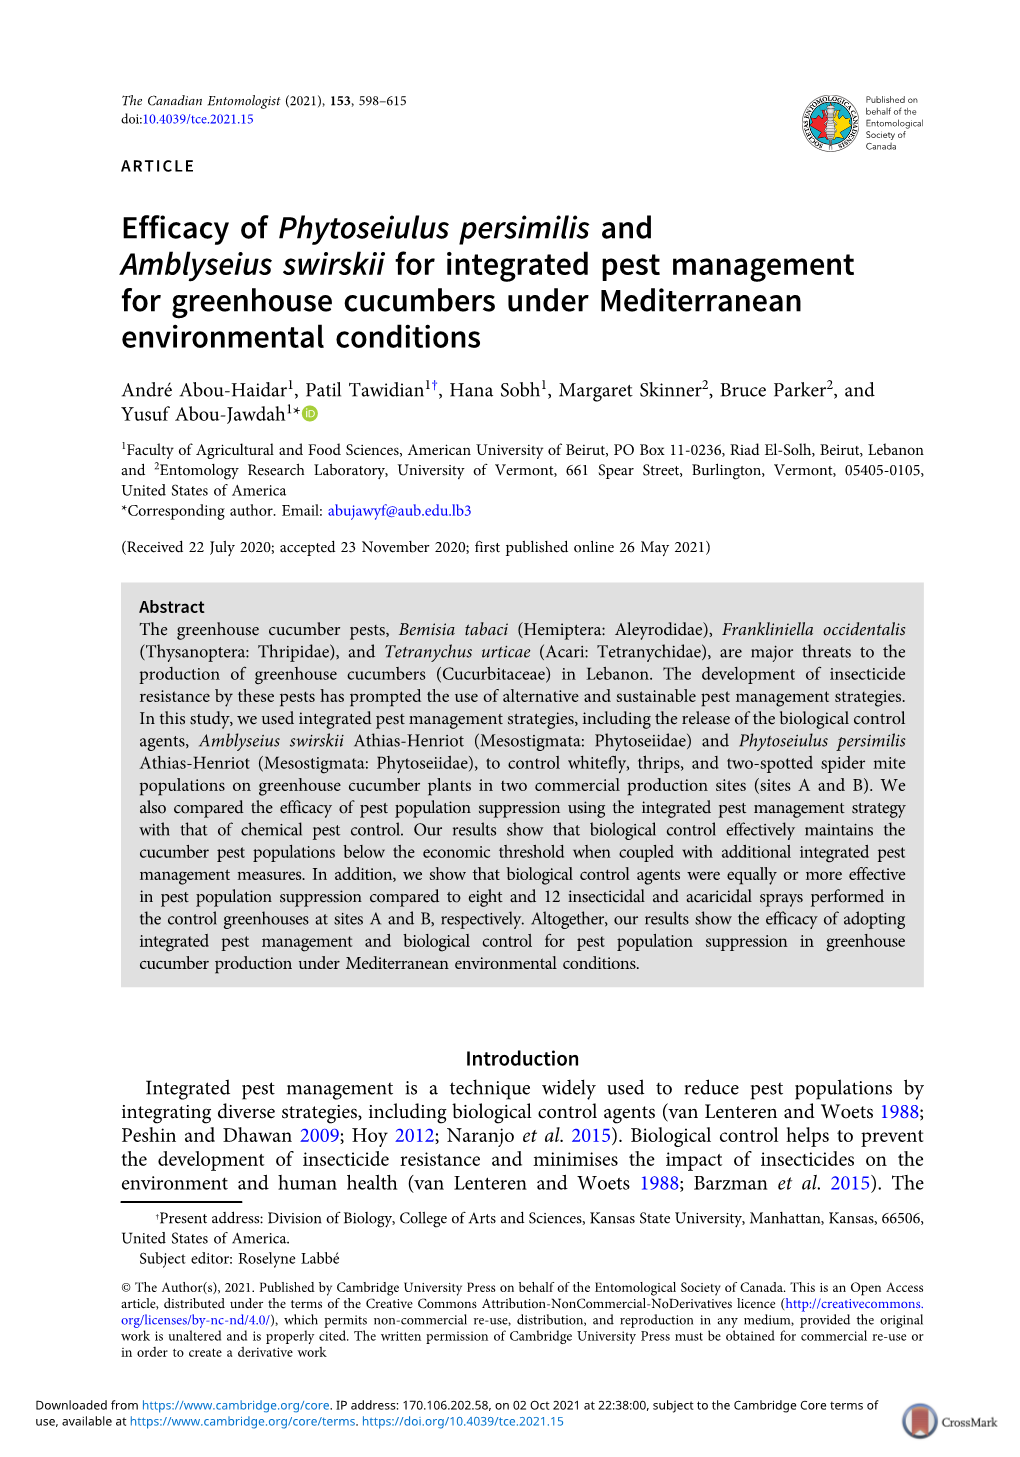 Efficacy of Phytoseiulus Persimilis and Amblyseius Swirskii for Integrated Pest Management for Greenhouse Cucumbers Under Mediterranean Environmental Conditions